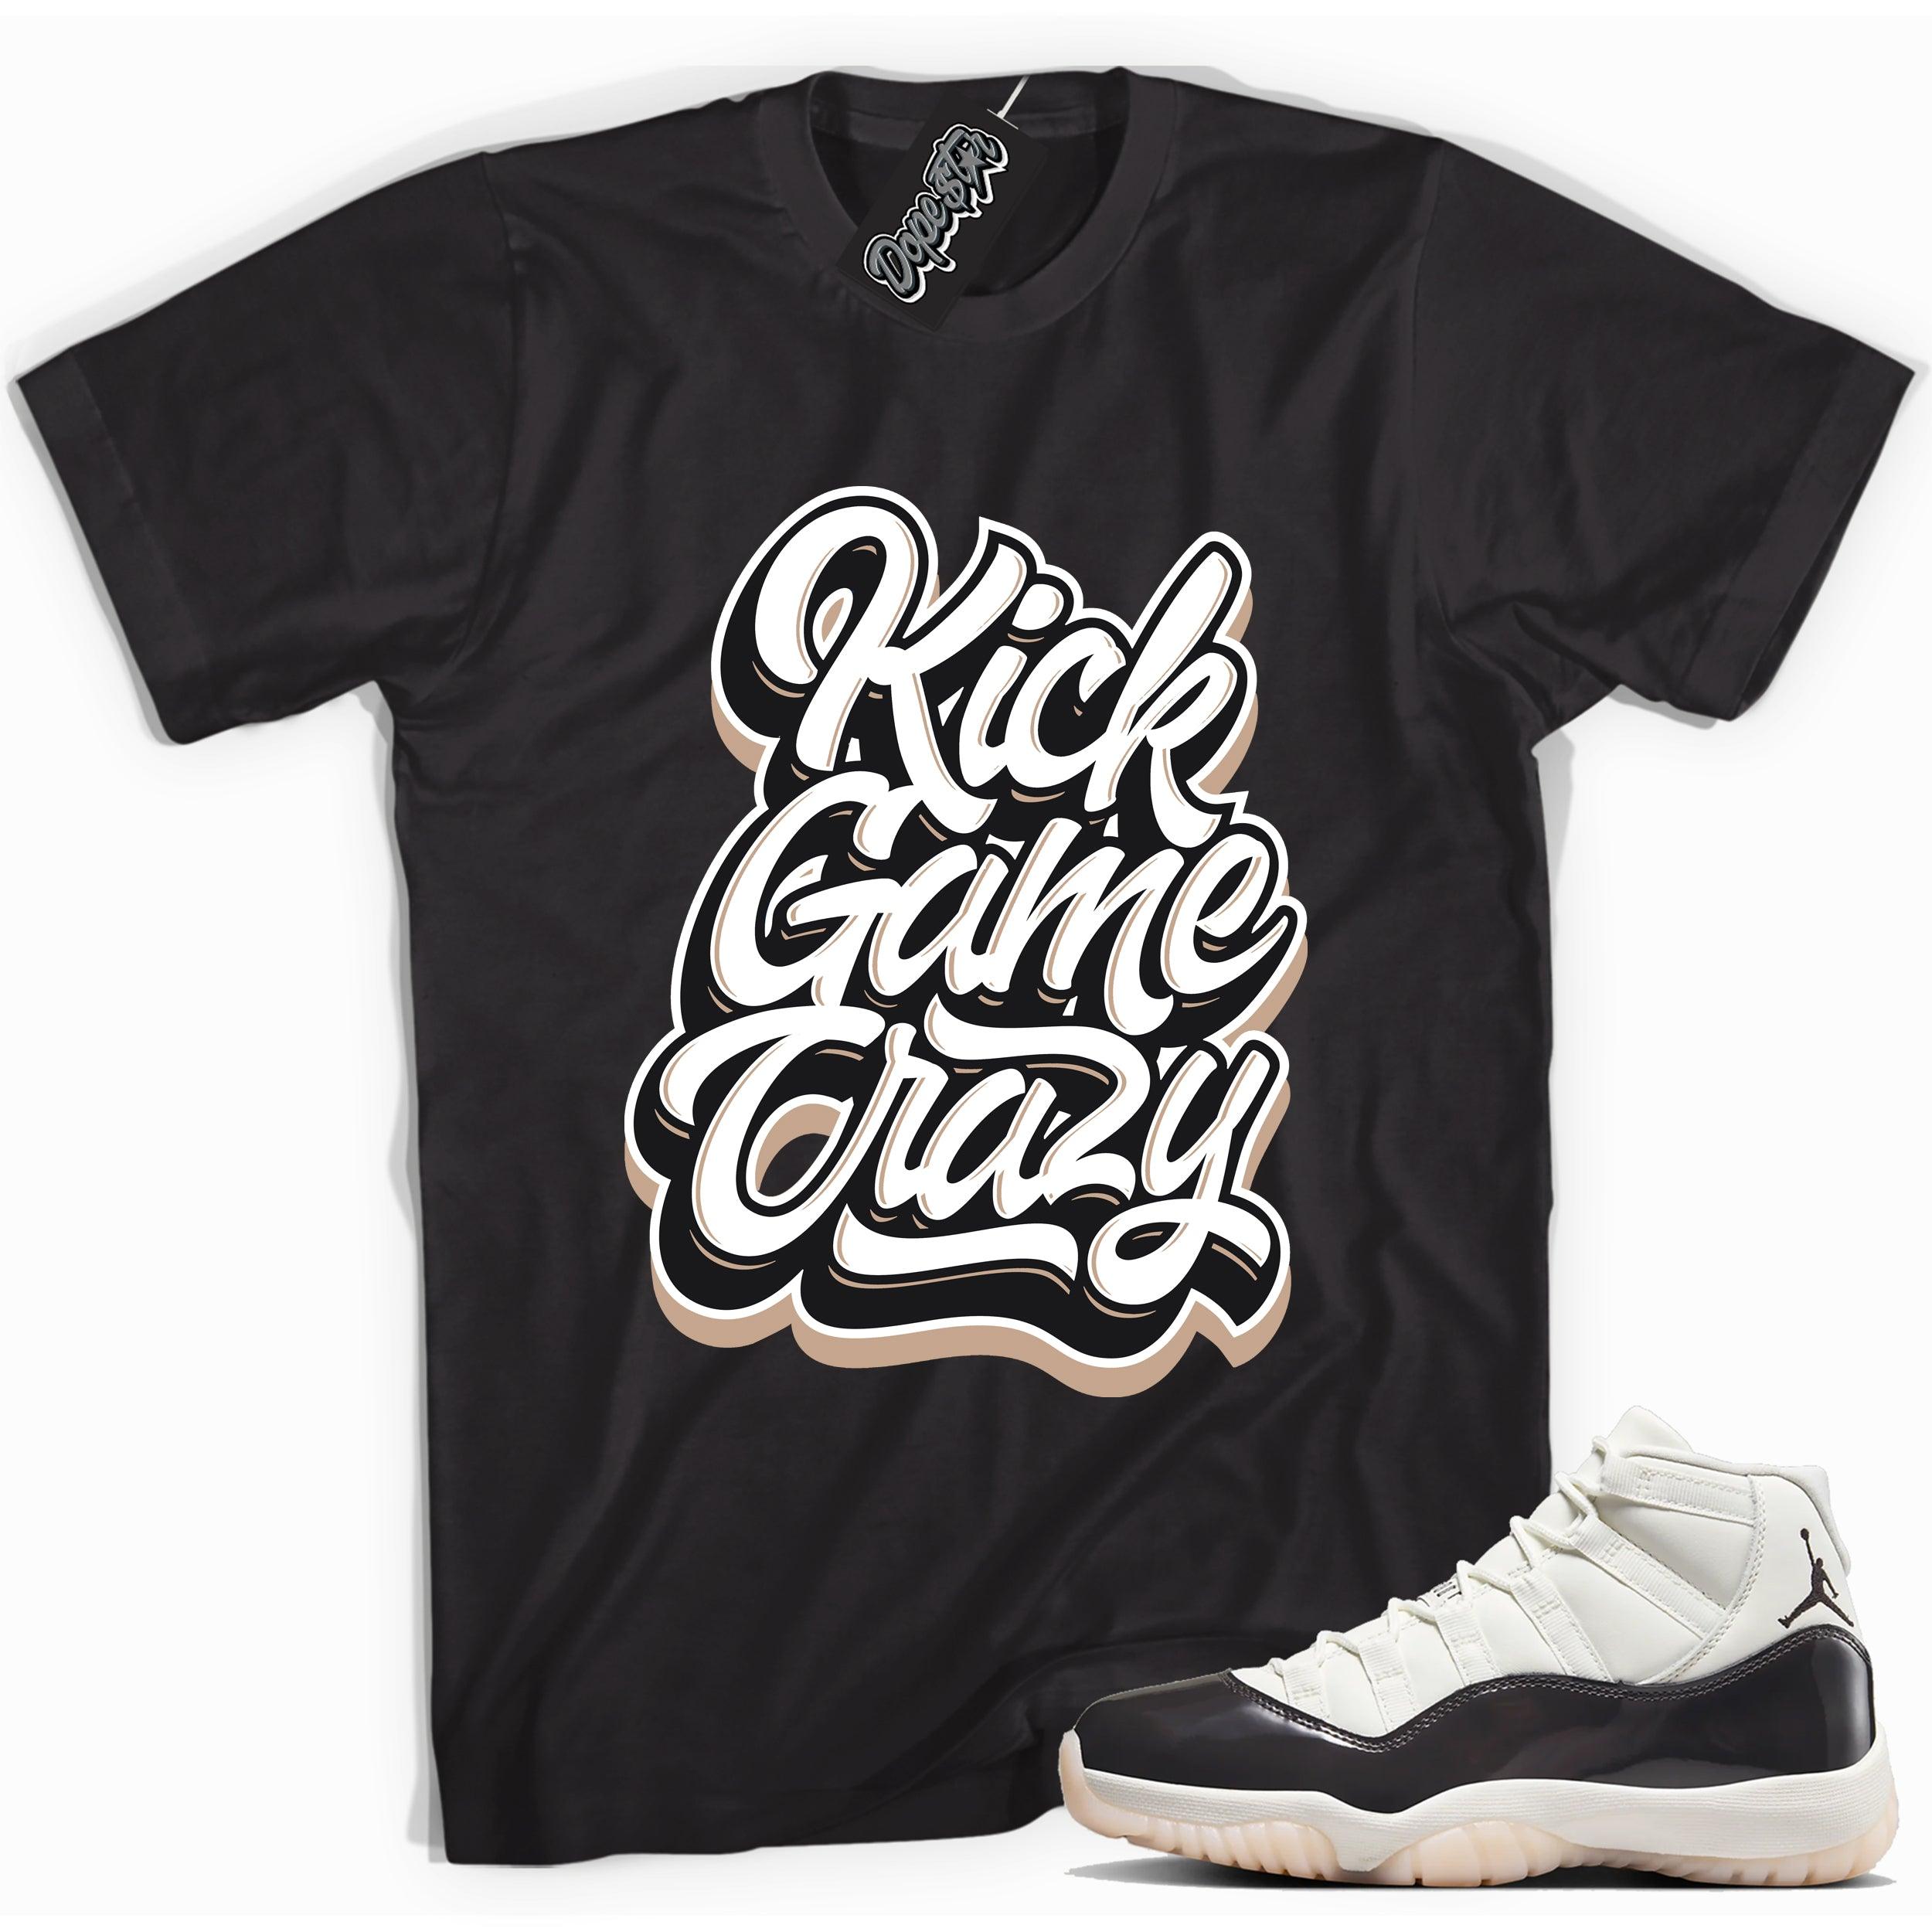 Cool Black graphic tee with “ Kick Game Crazy ” print, that perfectly matches Air Jordan 11 Neapolitan sneakers 